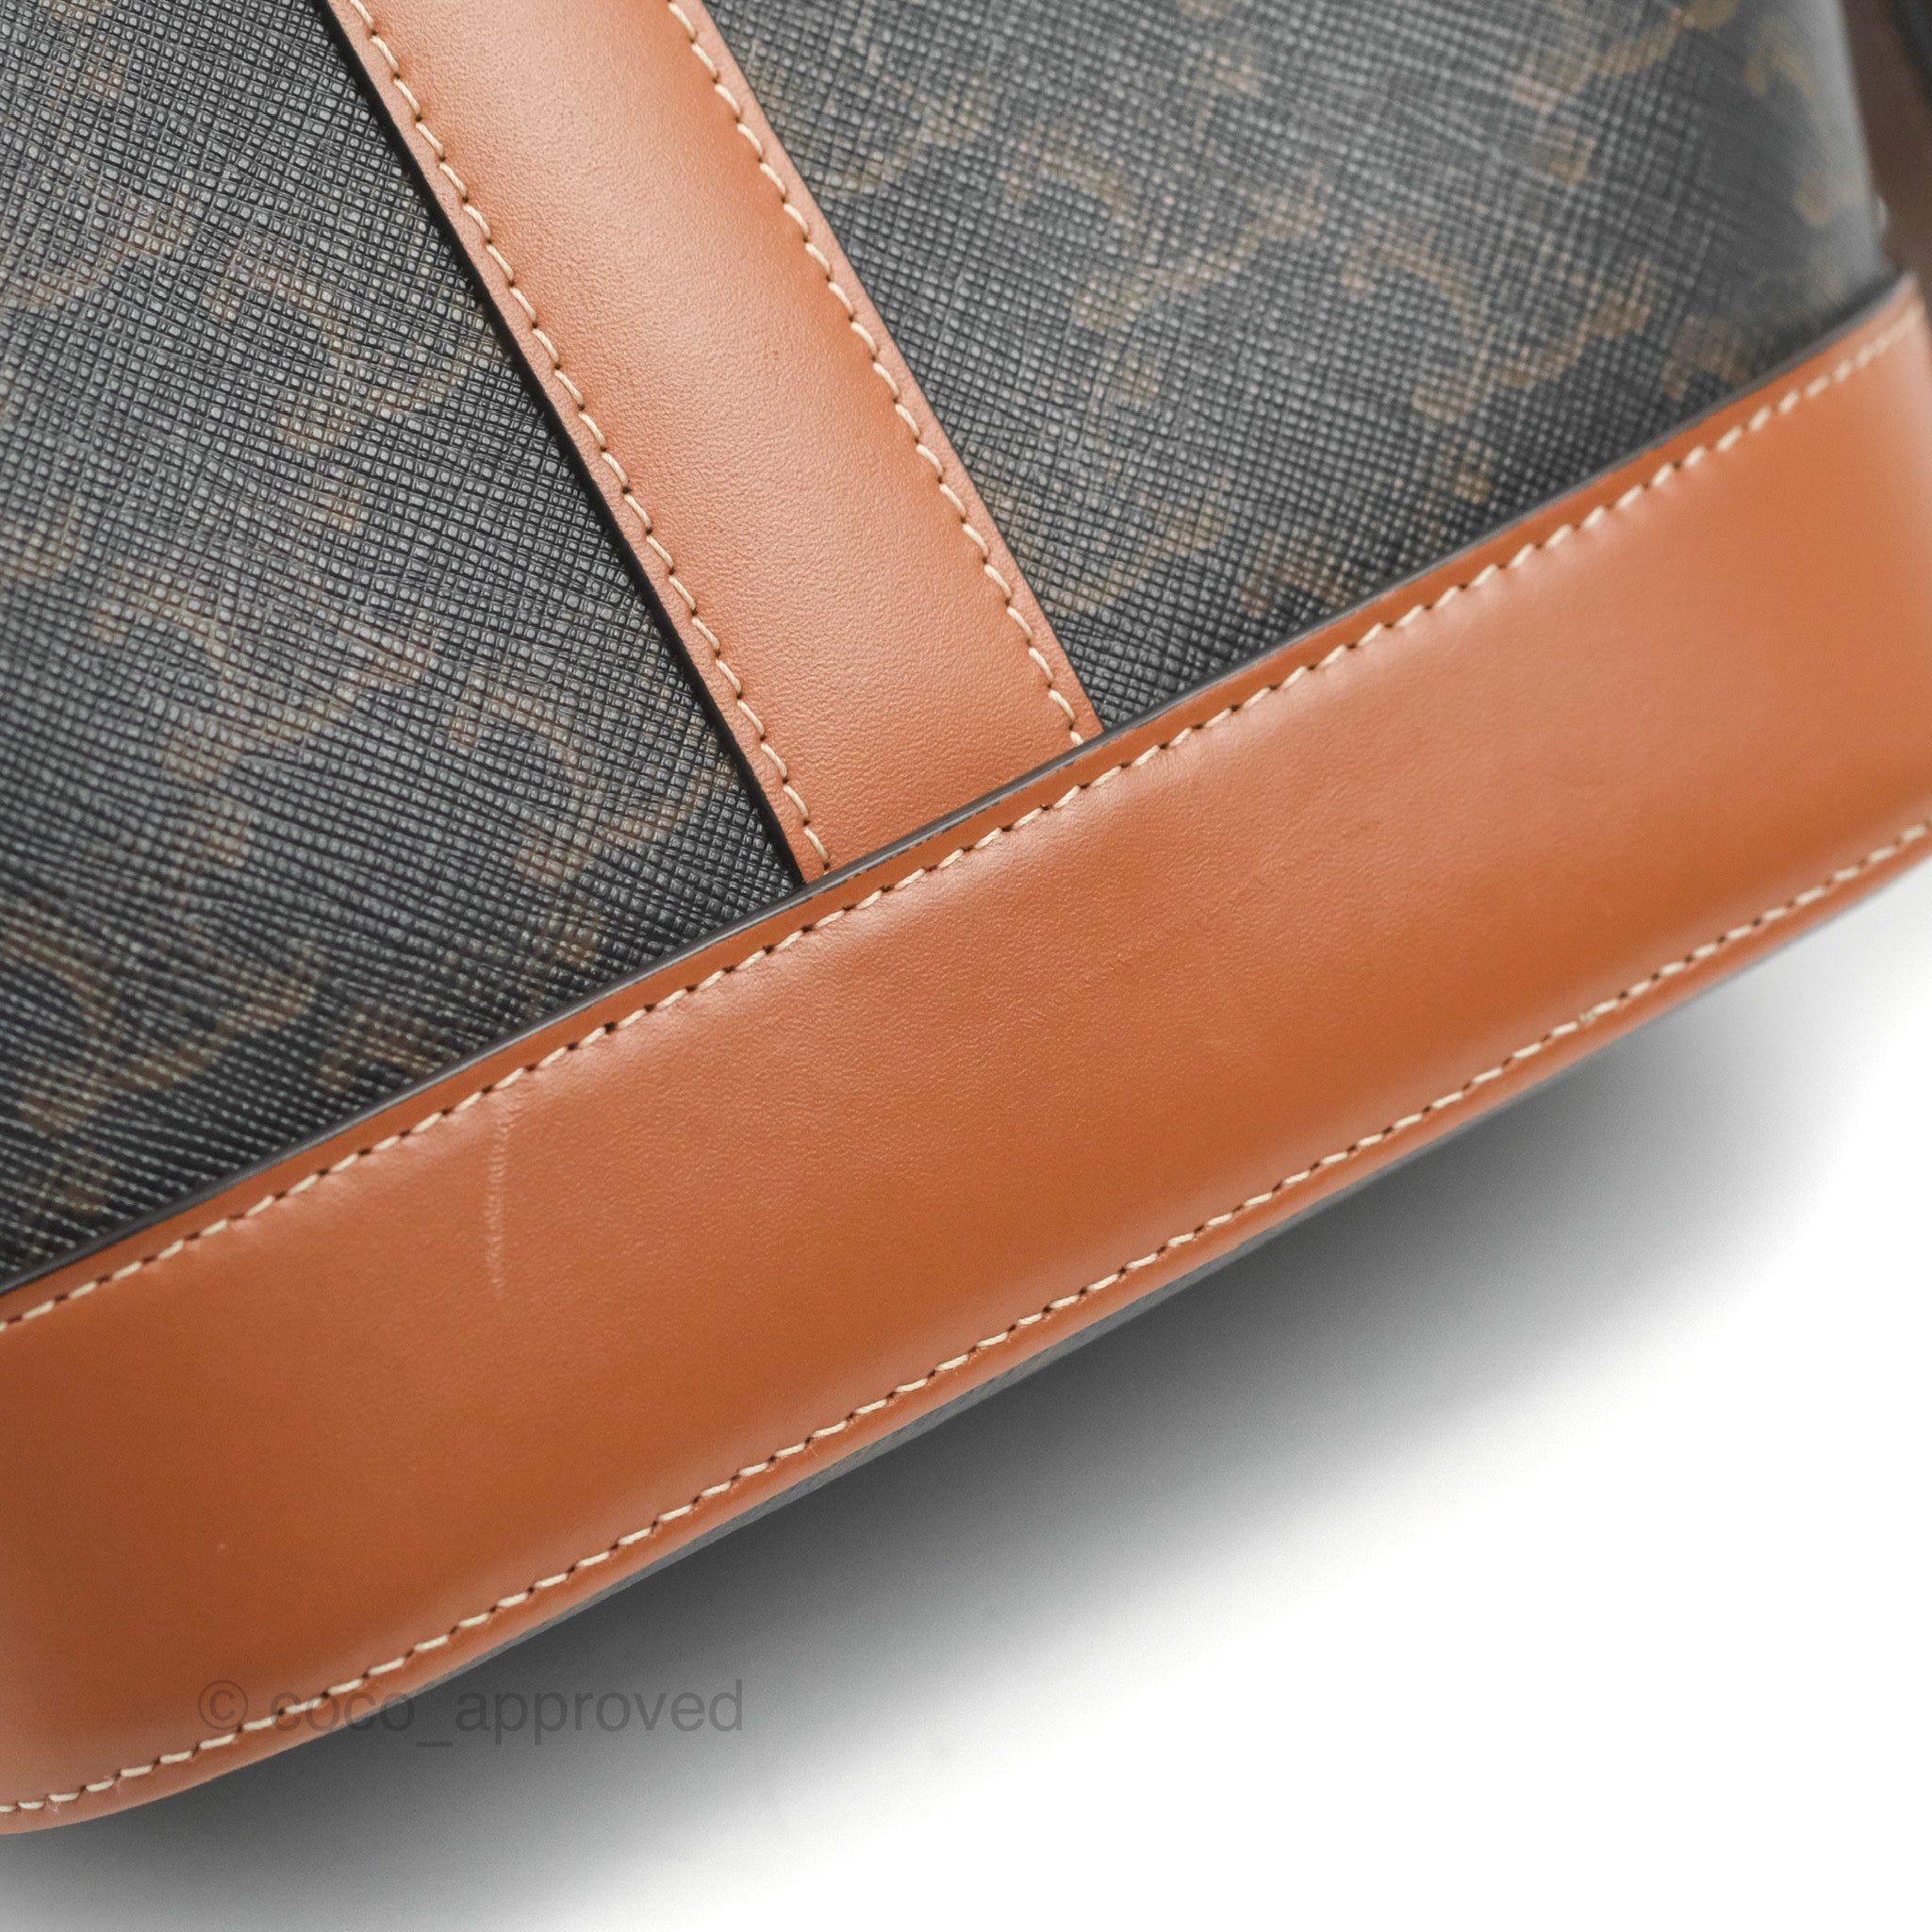 Celine Small Bucket in Triomphe Canvas and Calfskin in Tan colour